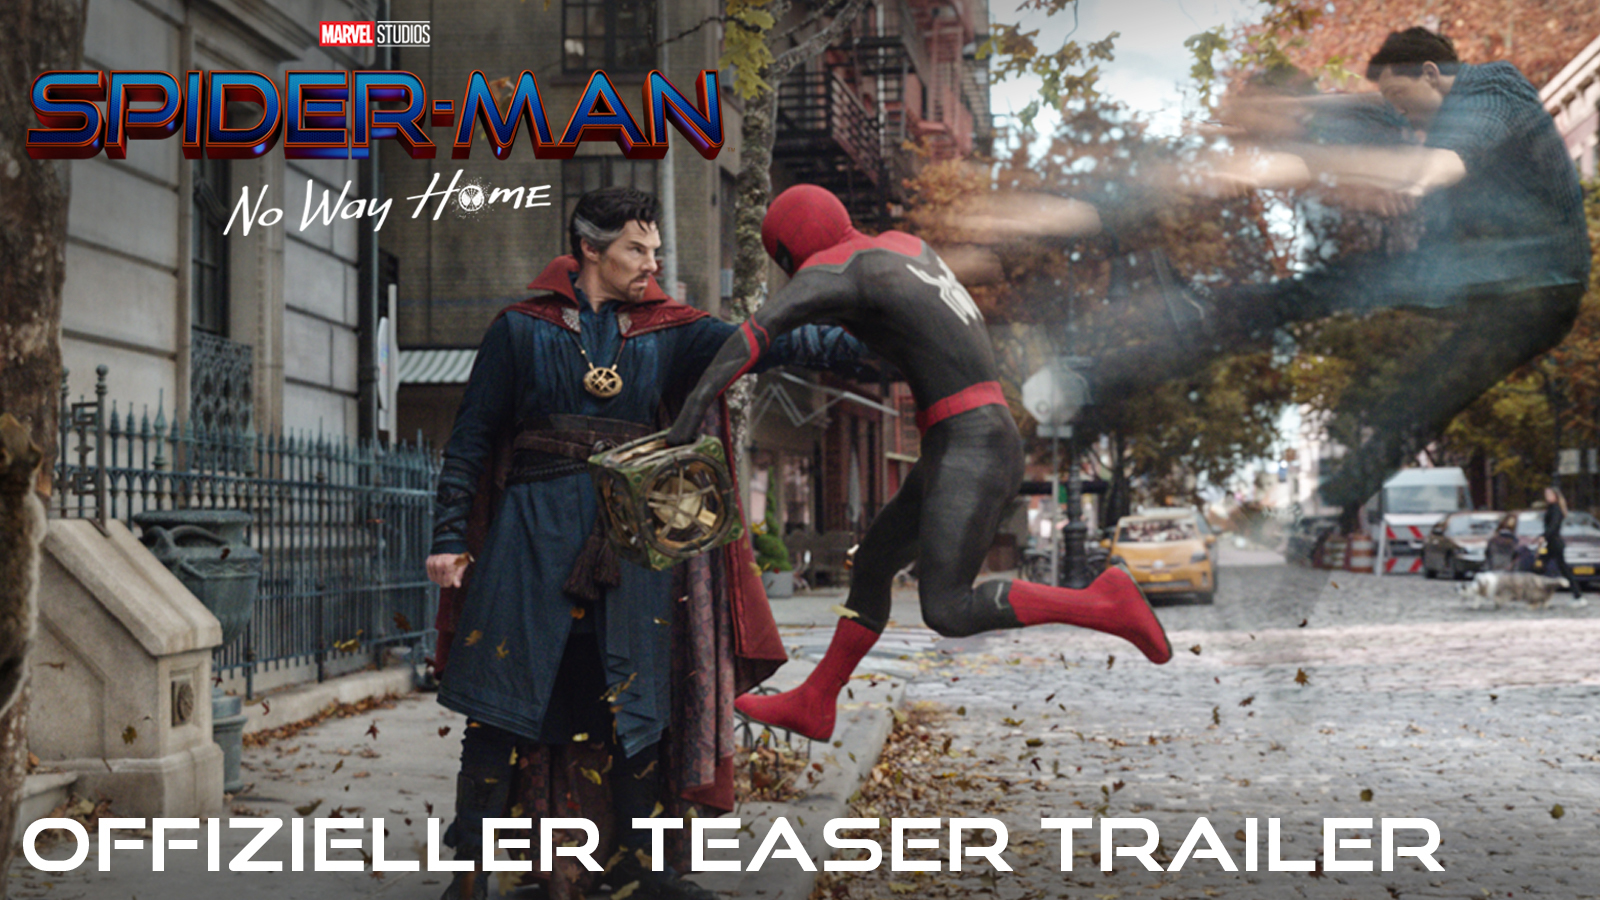 HOW TO WATCH SPIDERMAN NO WAY HOME TRAILER